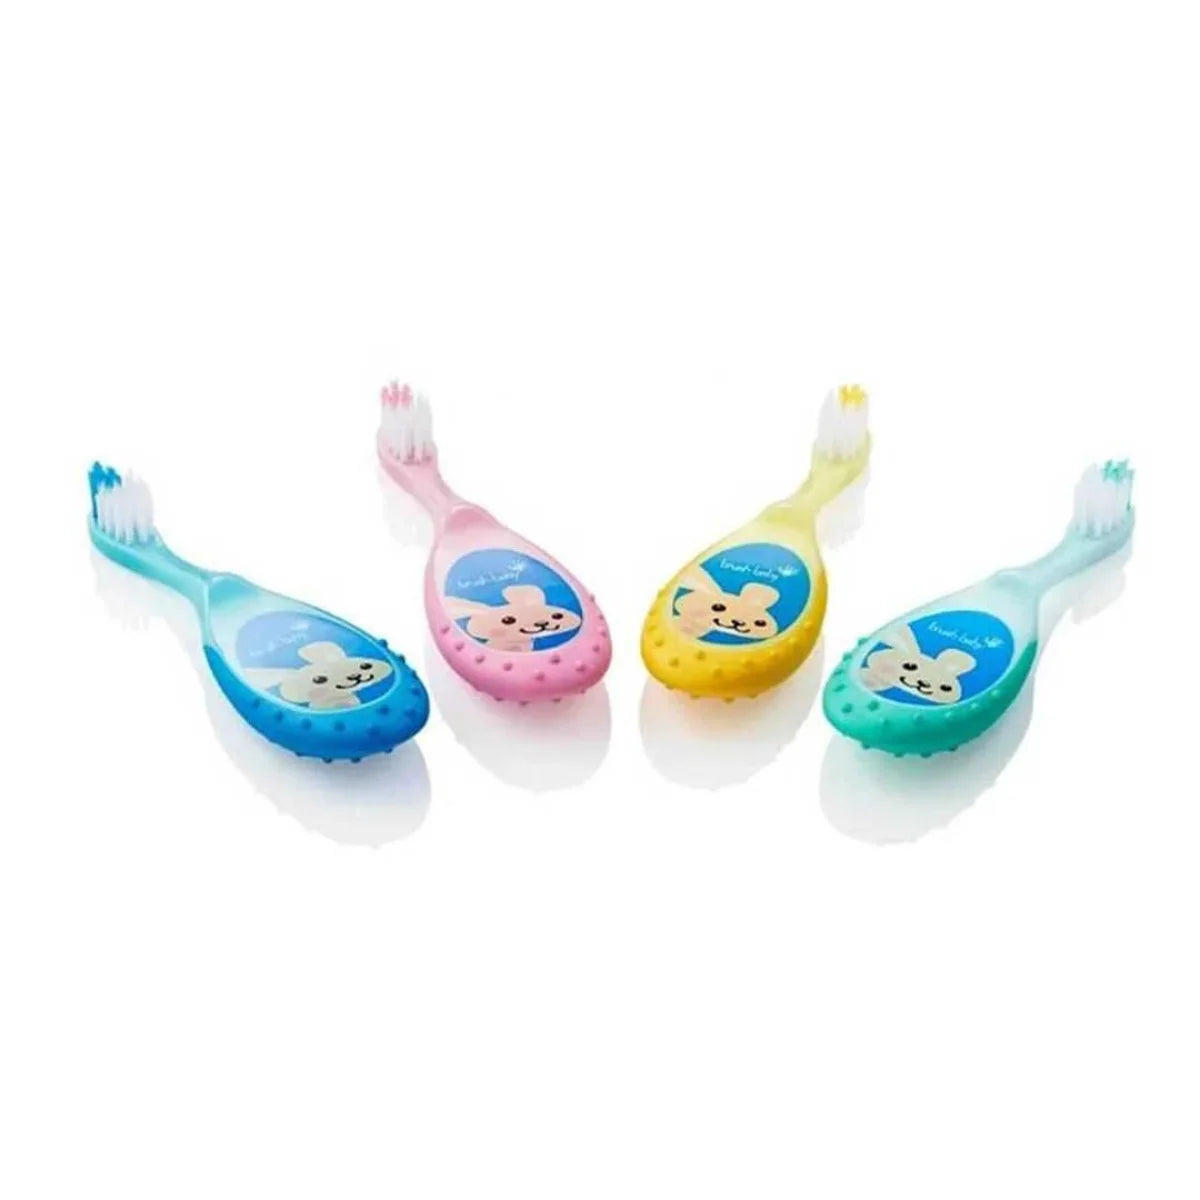 multi pack of wide handle flossbrush baby soft bristles toothbrushes in blue, pink, yellow and teal